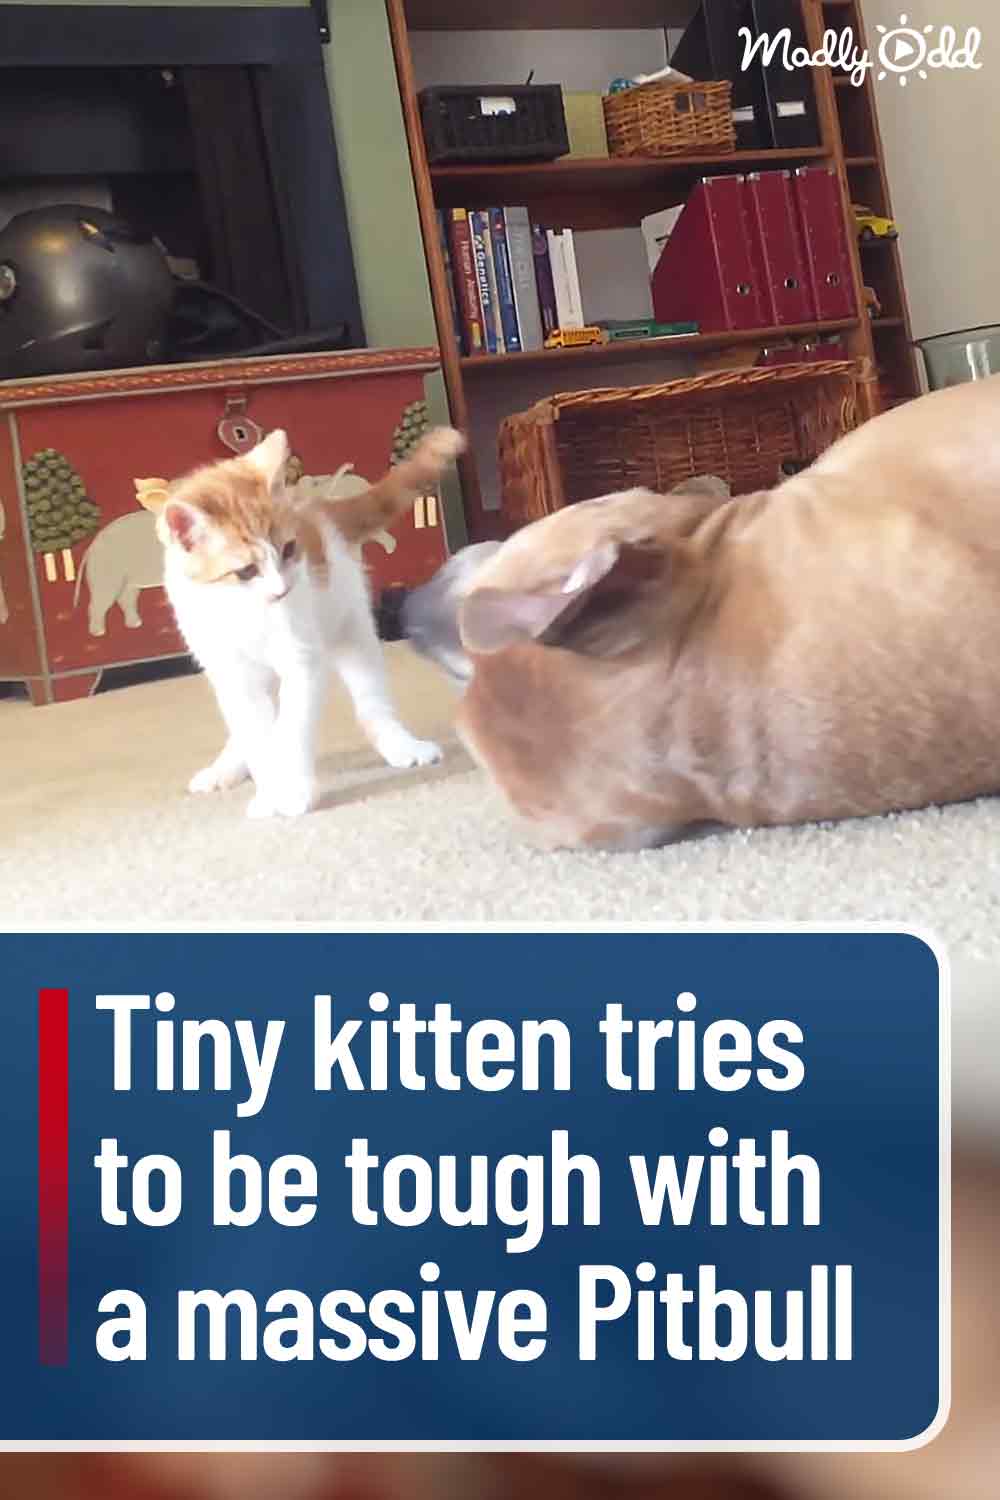 Tiny kitten tries to be tough with a massive Pitbull